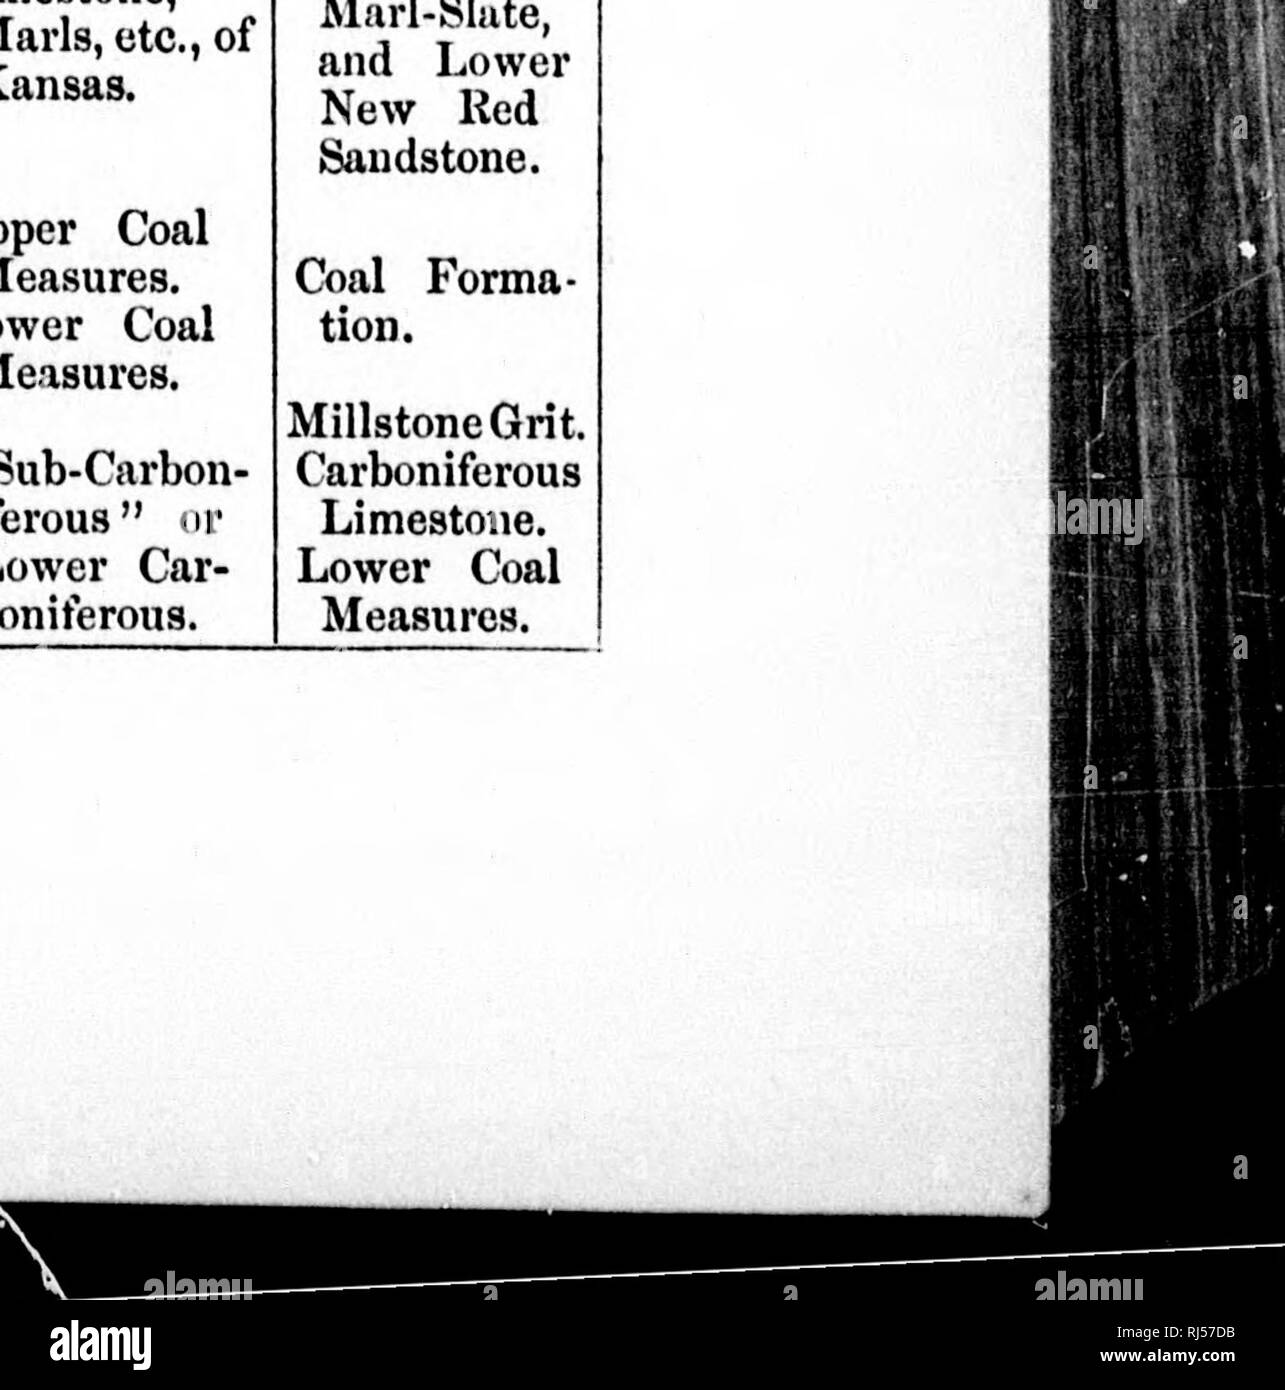 . Acadian geology [microform] : the geological structure, organic remains and mineral resources of Nova Scotia, New Brunswick and Prince Edward Island. Geology; Paleontology; Geology; Geology; Geologie; Paléontologie; Géologie; Géologie. T .BULAR ARRANOEMENT OF FORMATIONS. s history I'd of the imbedded o I'iirthcr reader to s wcU a3 licsc con- described, to arrange nni canses re ancient by calling prove the 3va Scotia ah to the we fail to snerally be the greater farther aid : those ele- L accessible. geological ,incd in the :ed in con- |ie complete and those I Provinces, ncl Canada. I. Cainoz Stock Photo